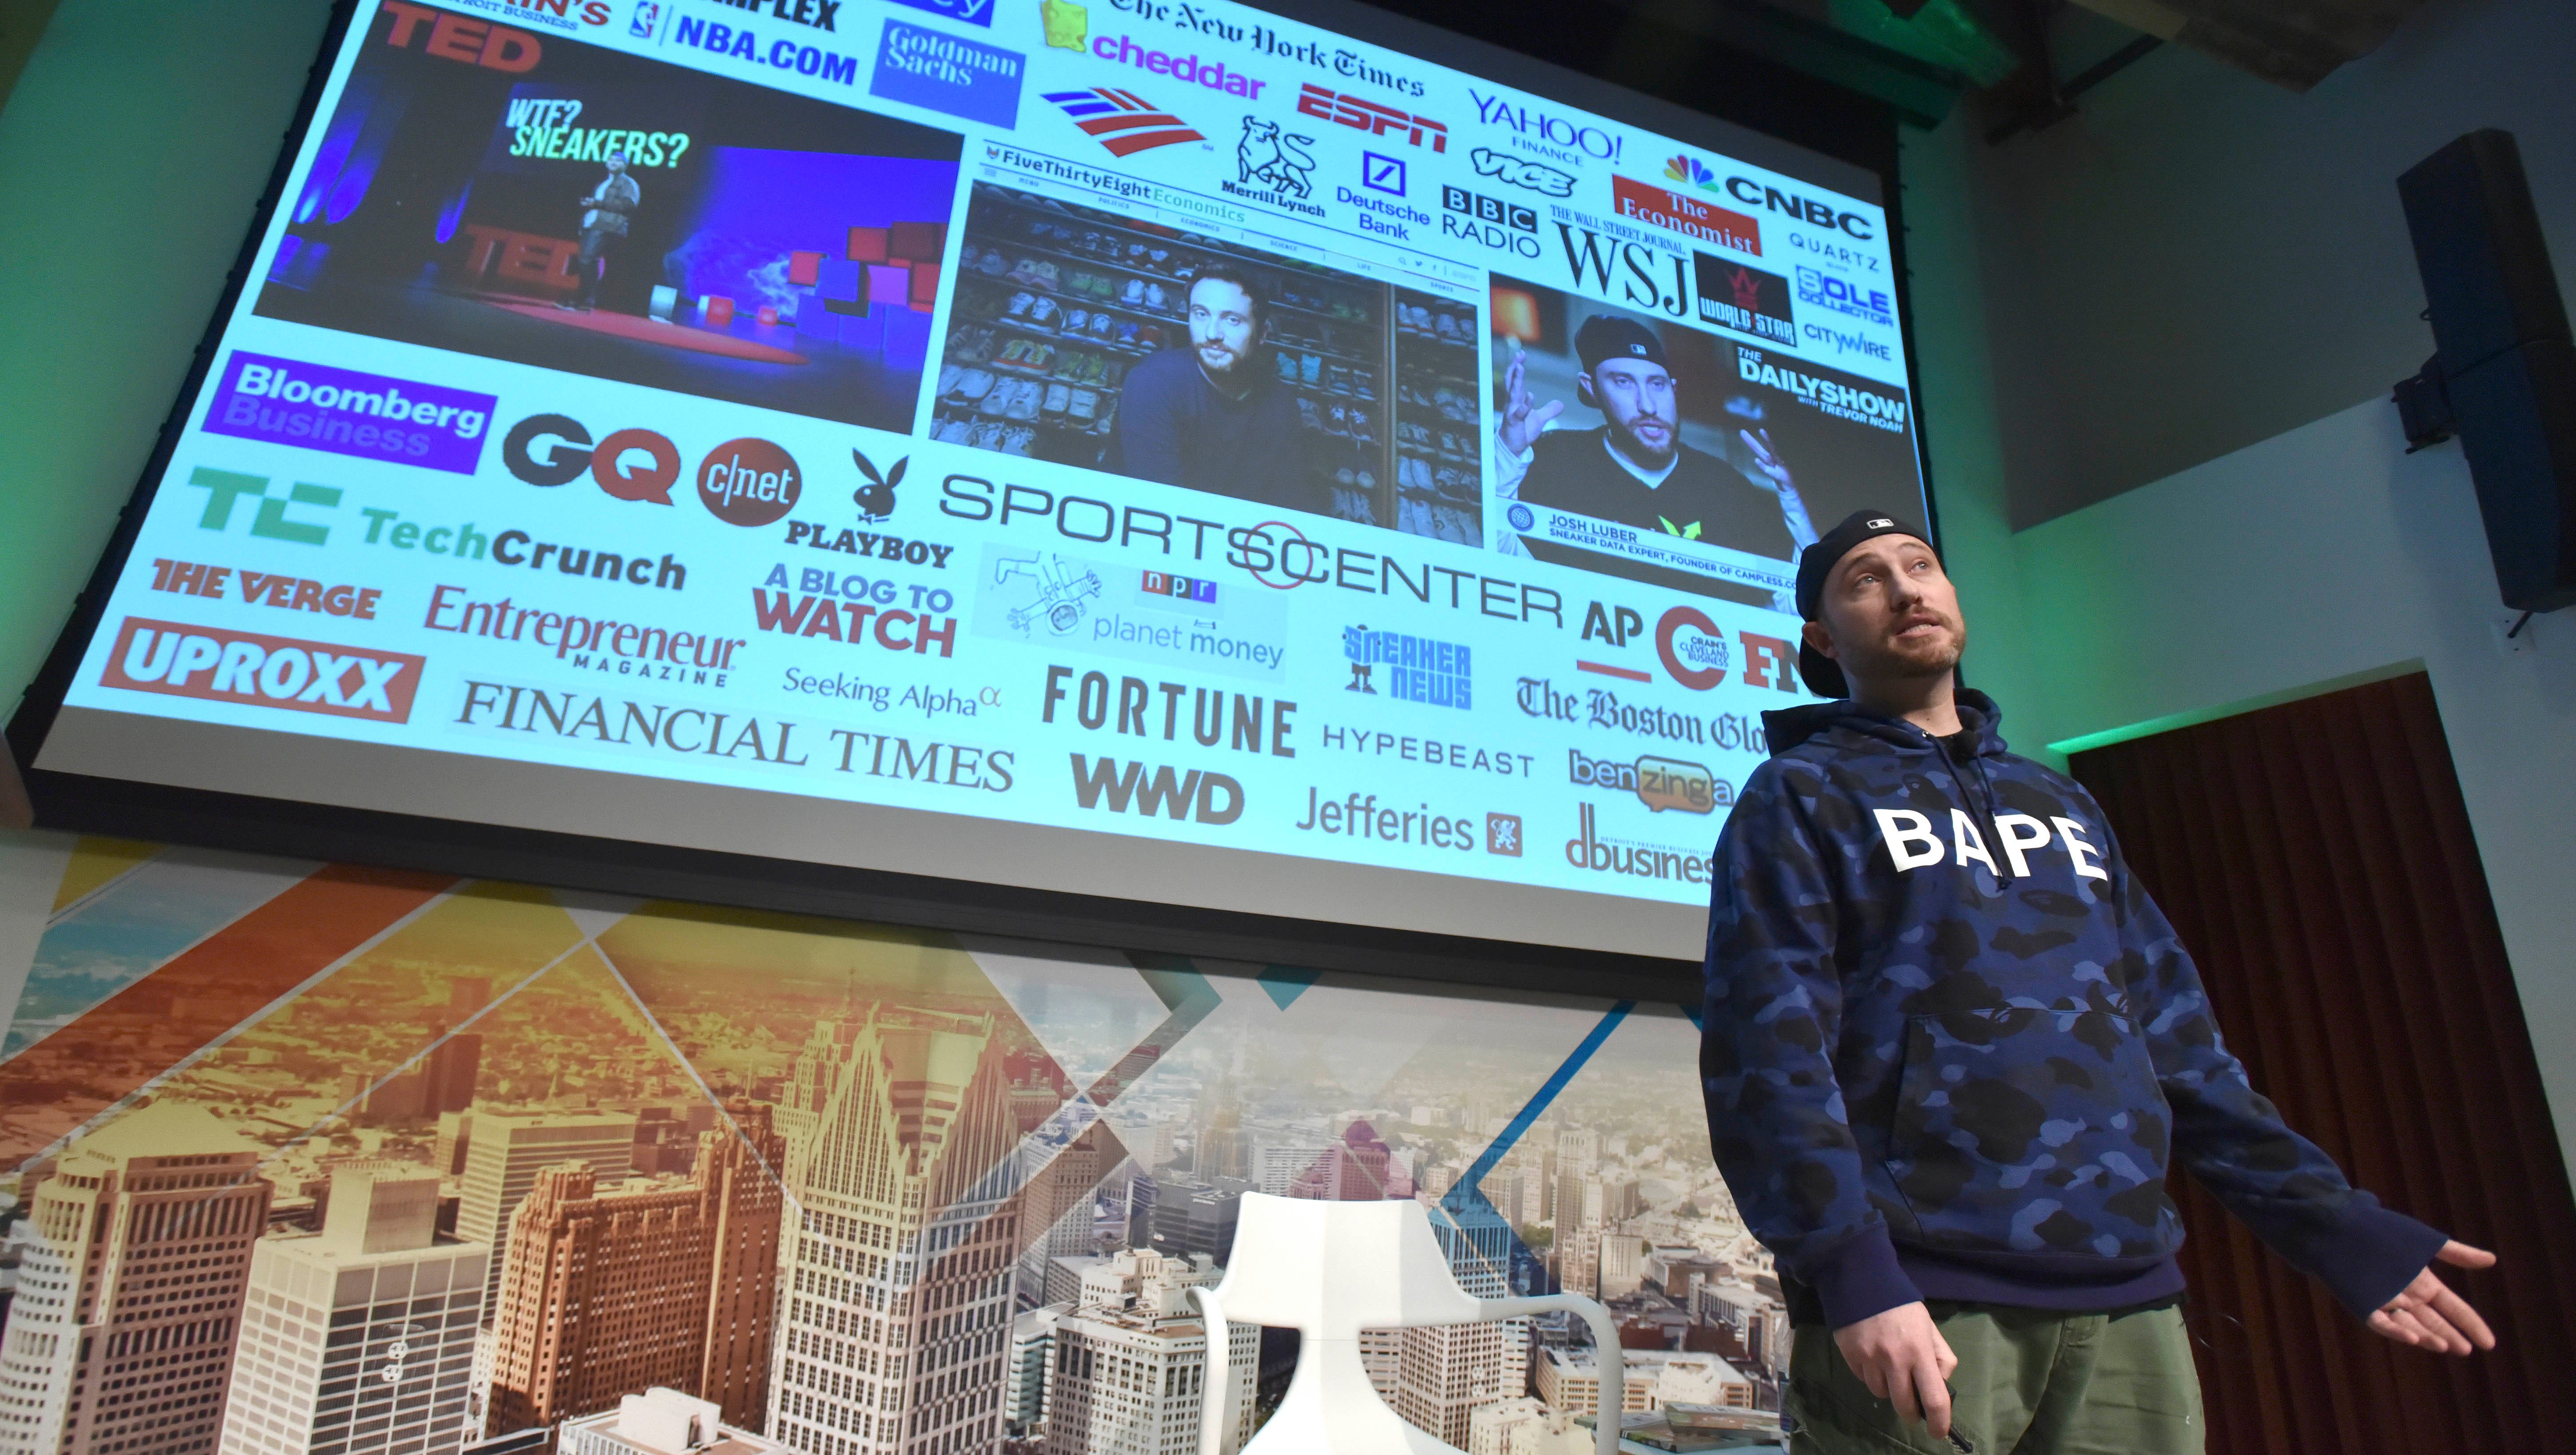 StockX CEO and co-founder Josh Luber talks to an auditorium full of sneaker fans during the StockX Day2 event in the Madison building in Detroit. StockX is a secondary market for the resale of sneakers, street wear, hand bags and watches.